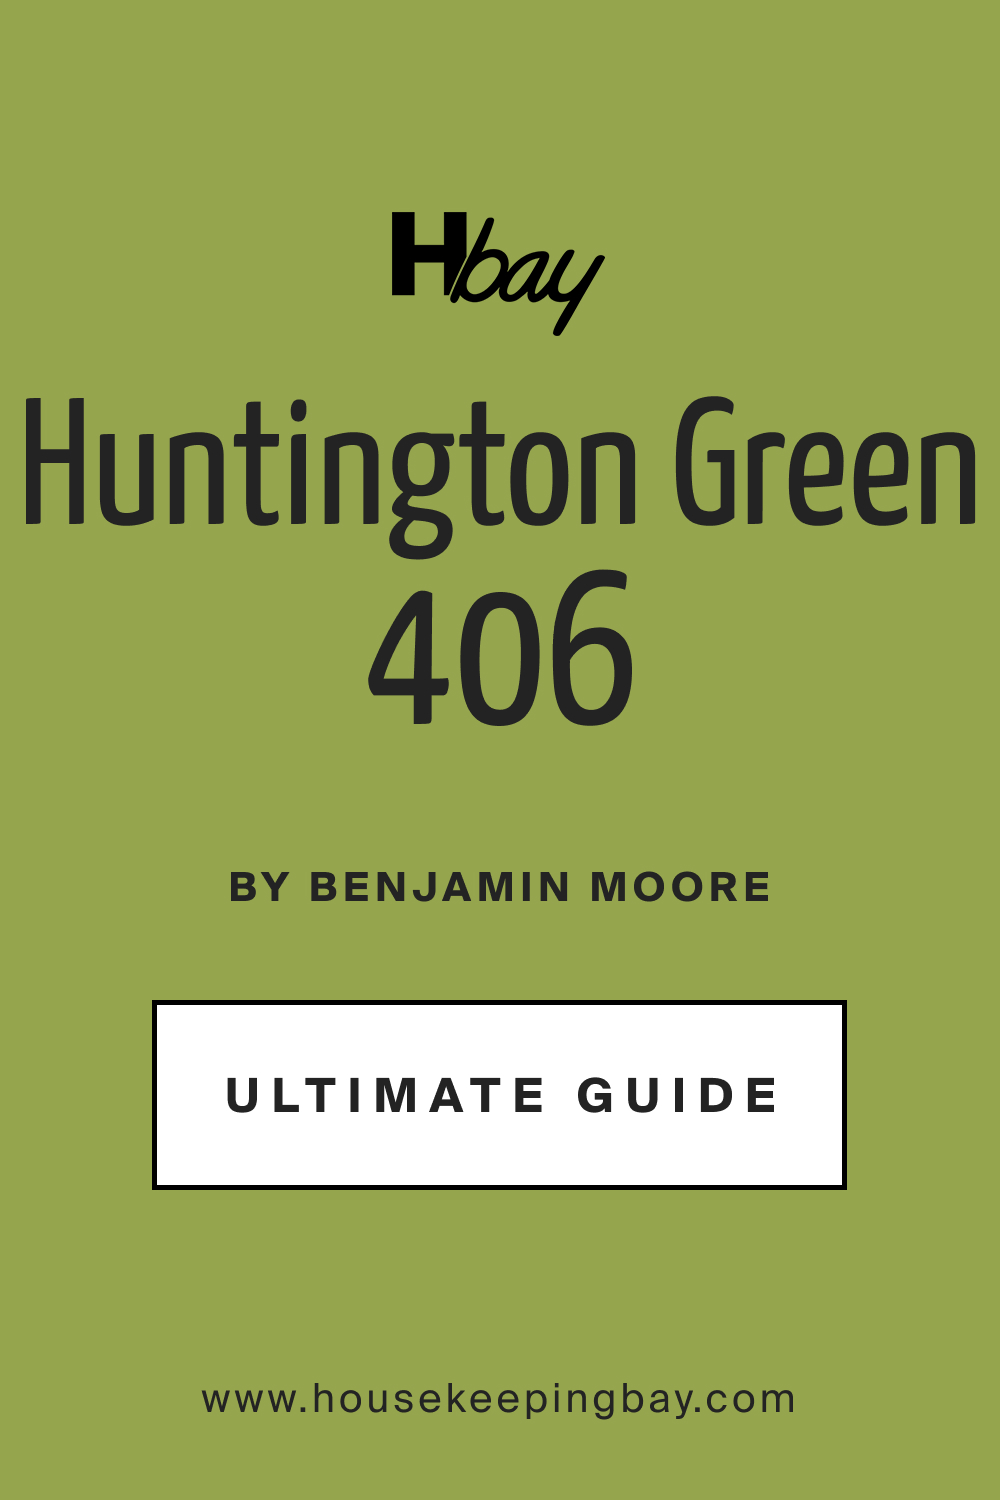 Ultimate Guide of Huntington Green 406 Paint Color by Benjamin Moore